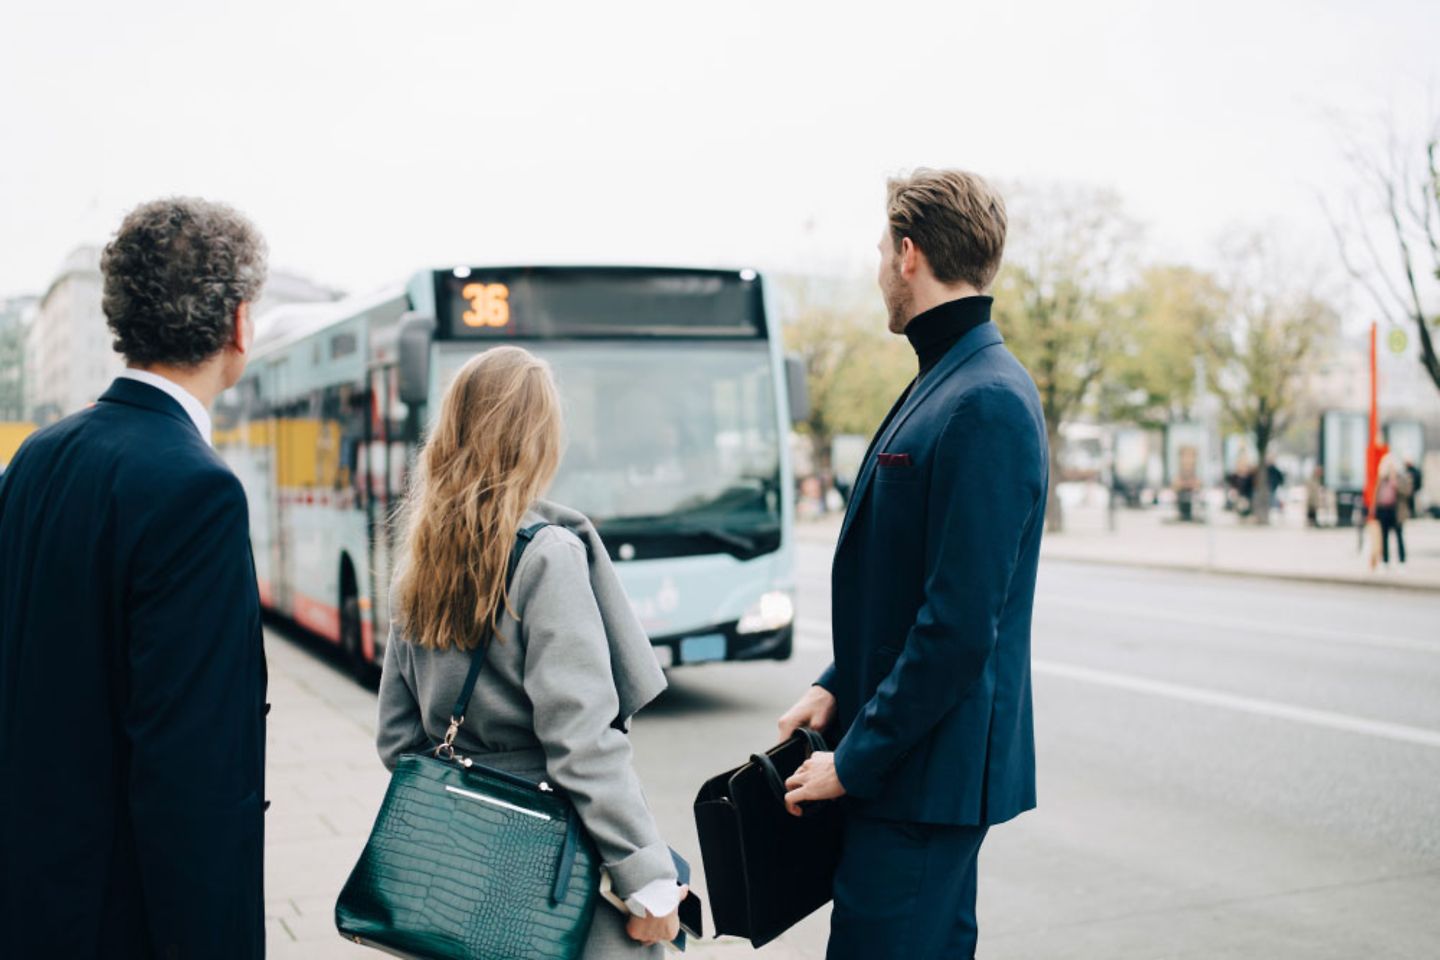 A group of businesspeople looks in the direction of a public bus in the city